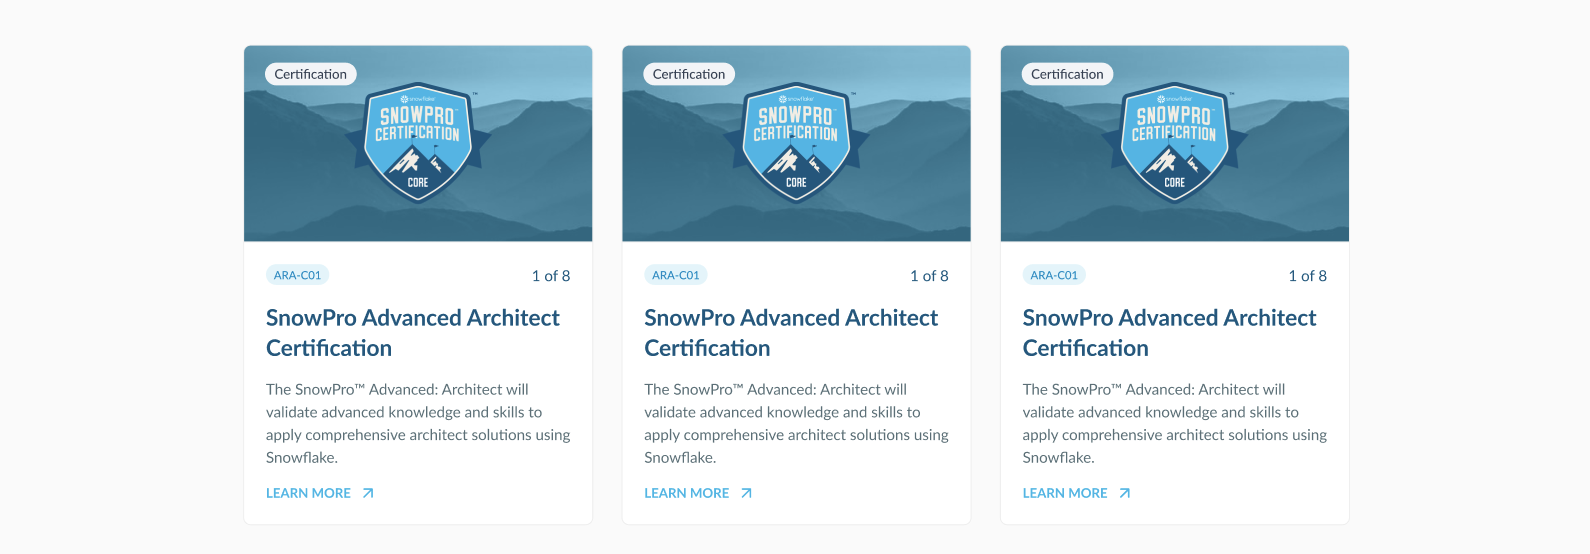 snowflake-certifications-component